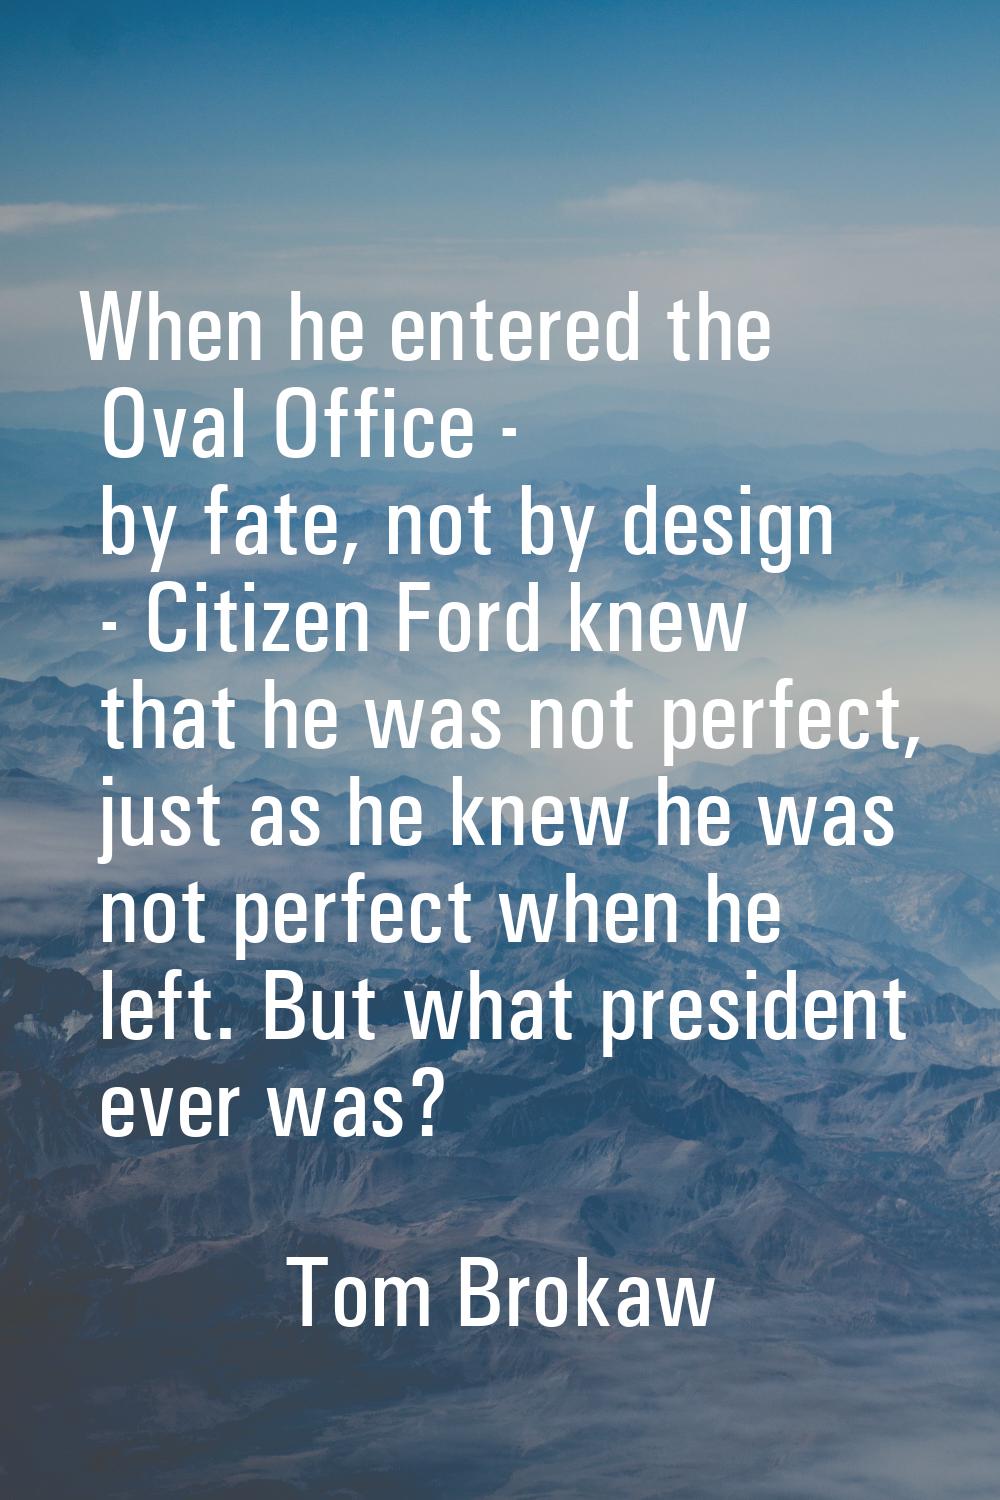 When he entered the Oval Office - by fate, not by design - Citizen Ford knew that he was not perfec